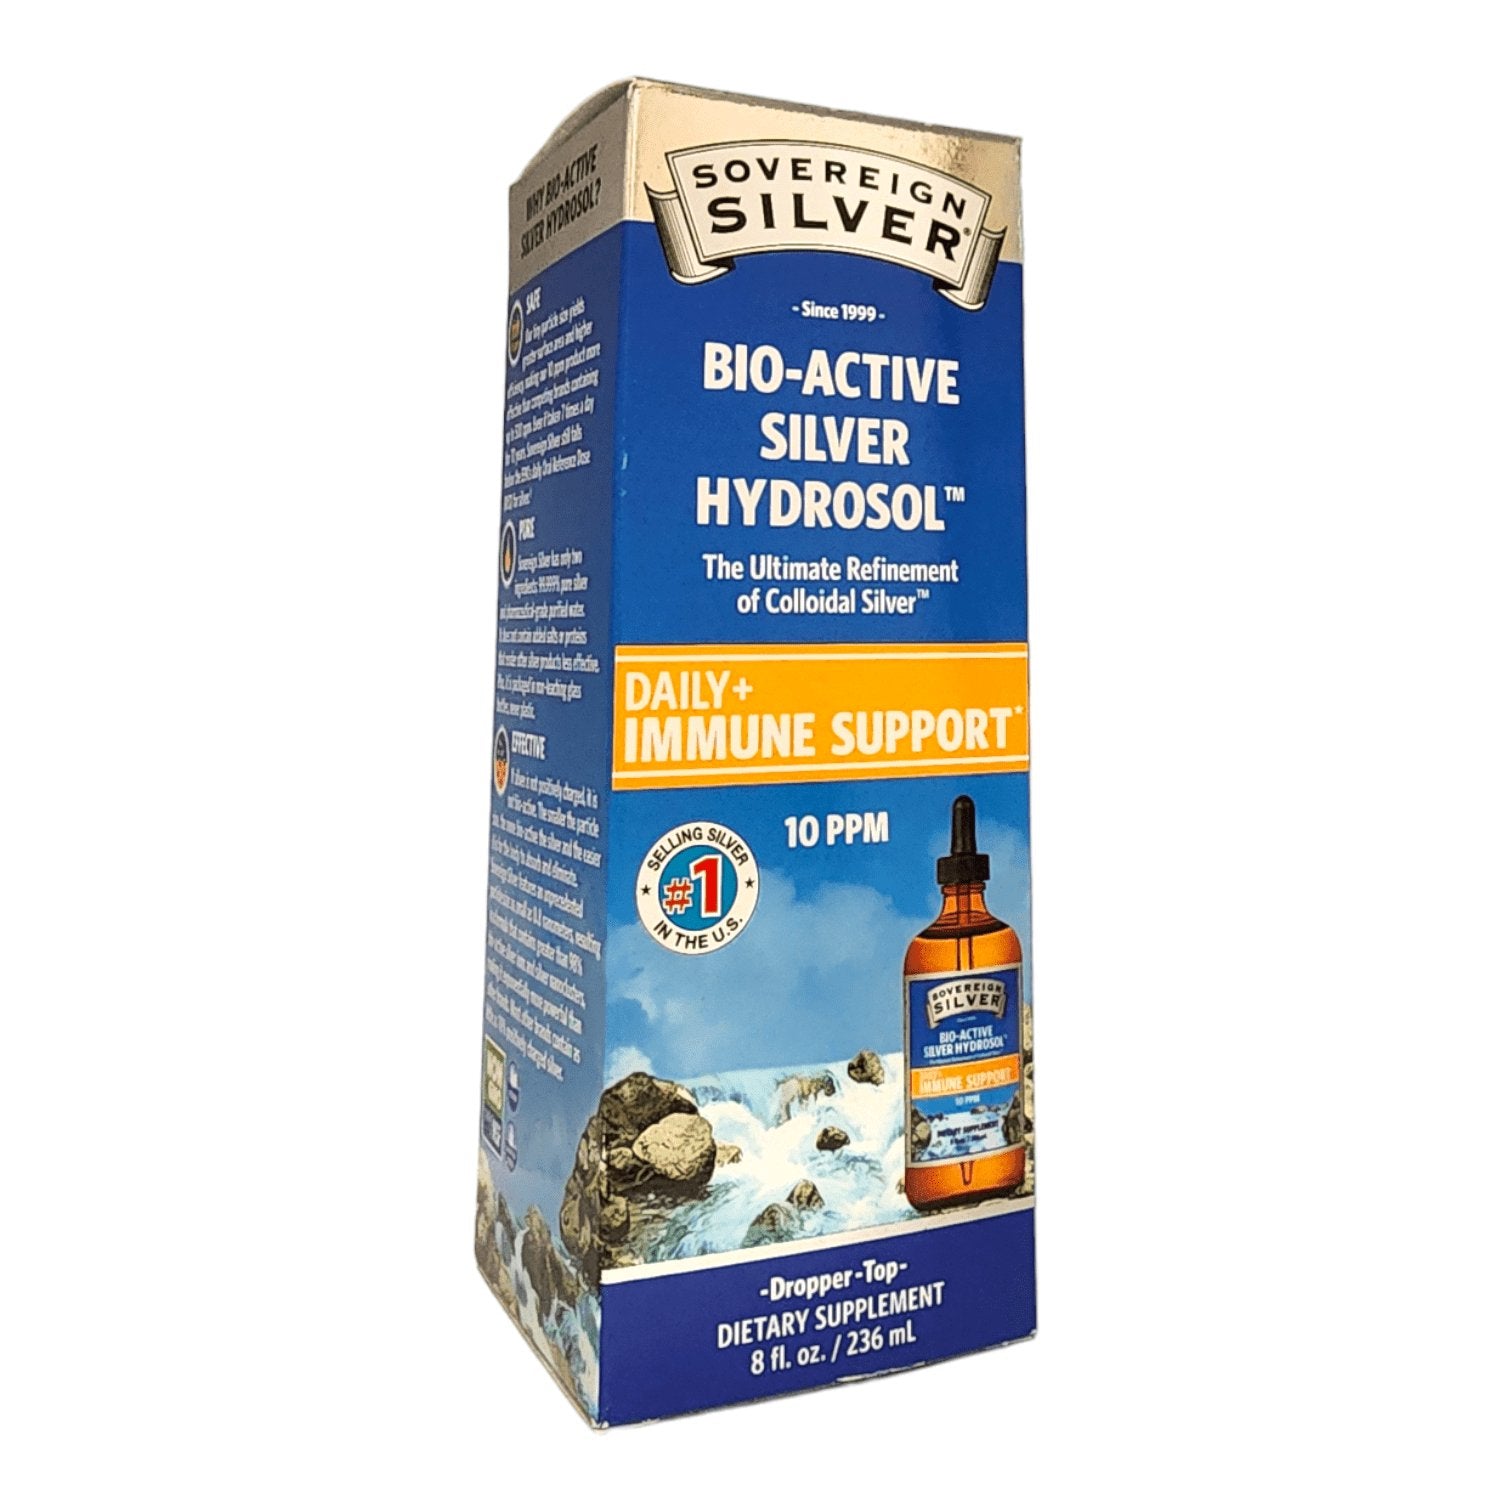 SOVEREIGN SILVER - BIO/ACTIVE SILVER HYDROSOL FOR IMMUNE SUPPORT - The Vault